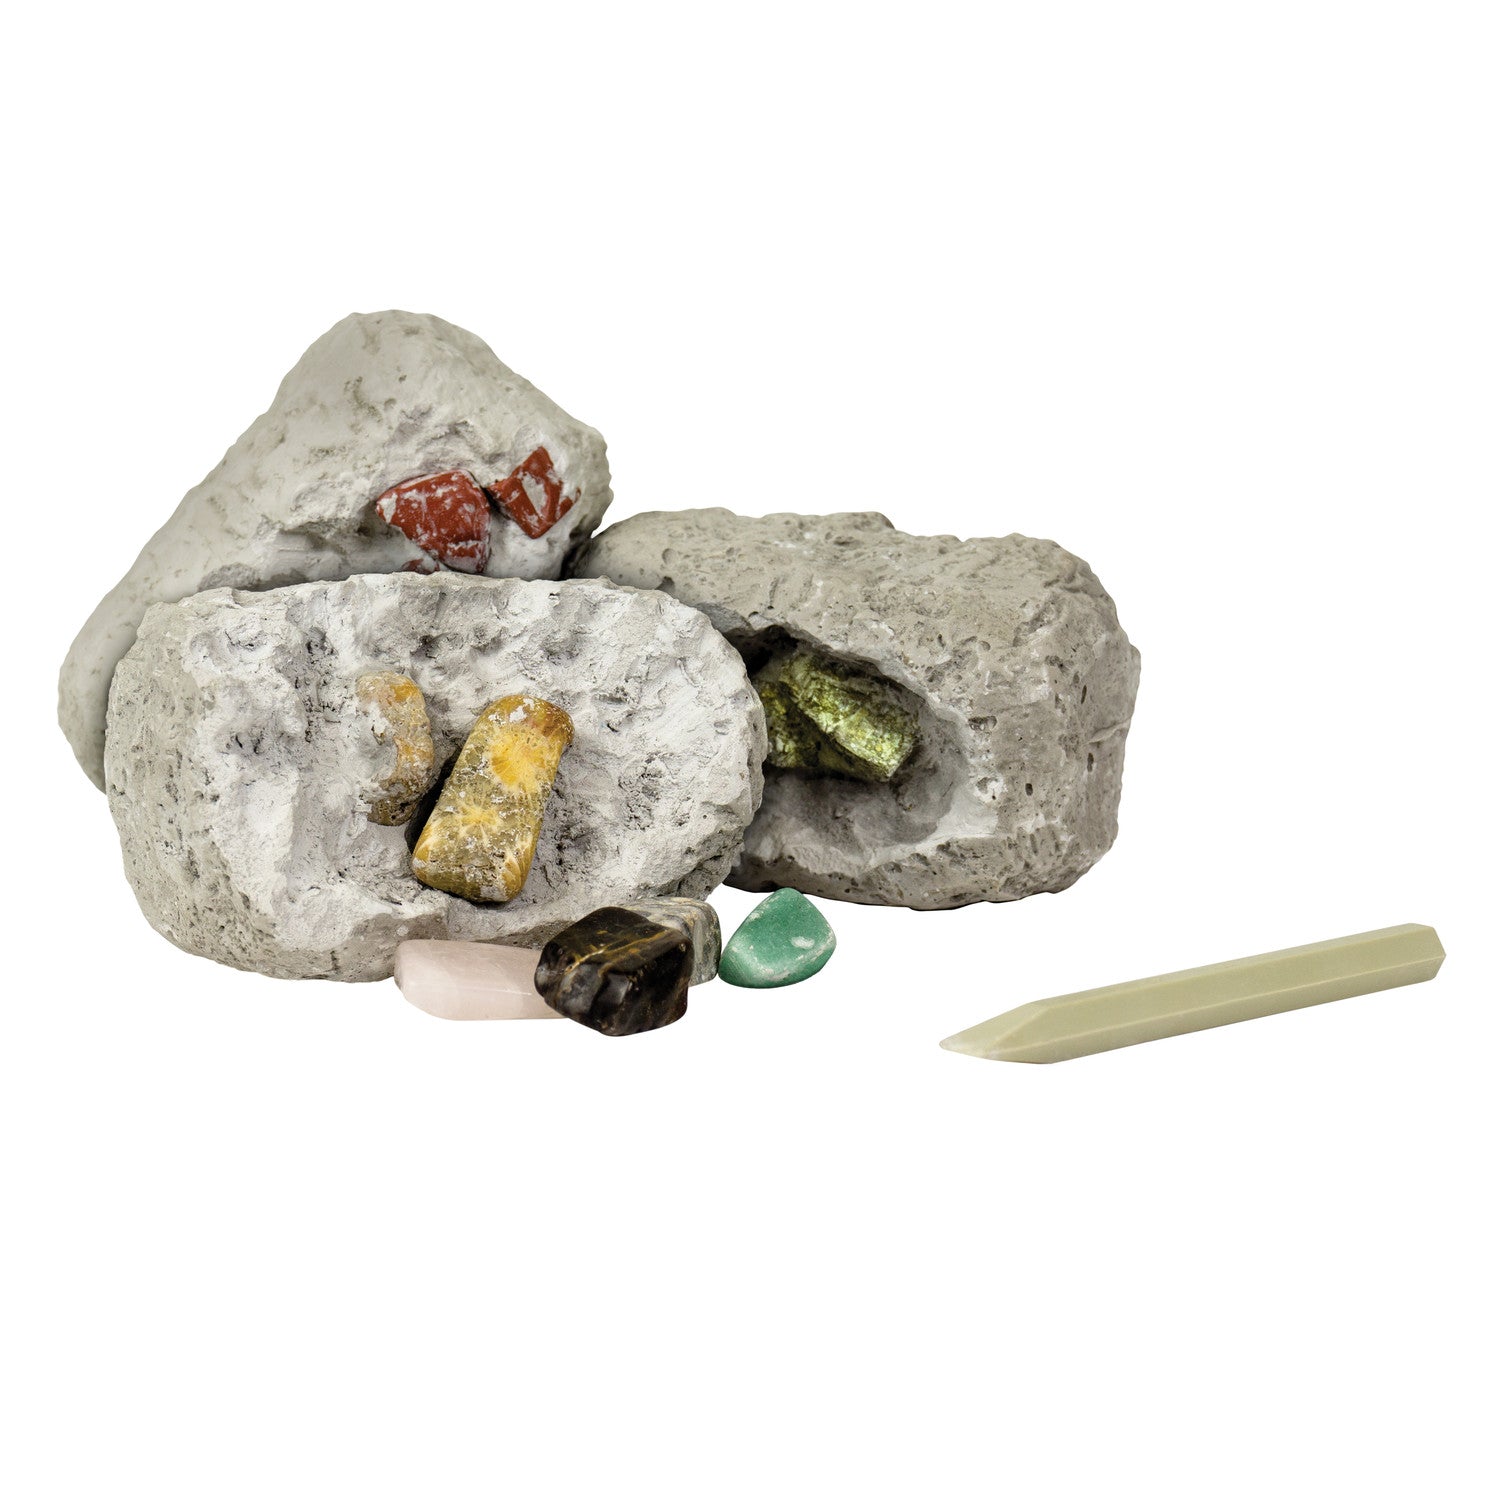 Dig it Up Minerals and Fossils Kit – The Science Museum of Minnesota